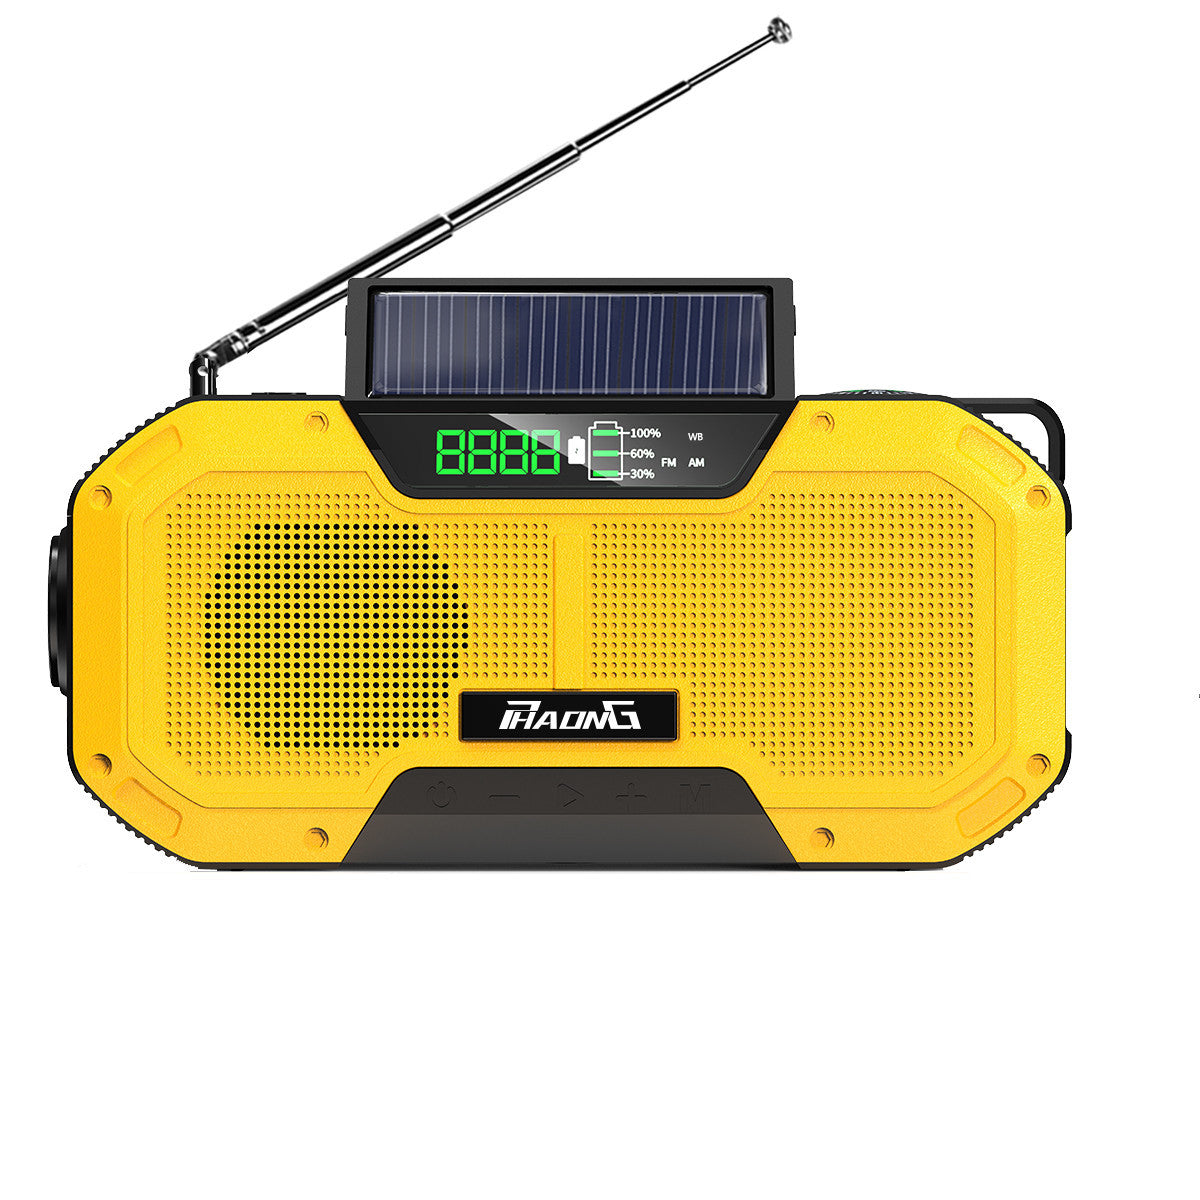 This solar powered emergency radio has a Bluetooth speaker, strong flashlight and several mobile phone charger plugs.  This is great for your emergency kits, camping kits and can provide much needed solar power when electricity isn't available due to an emergency situation.